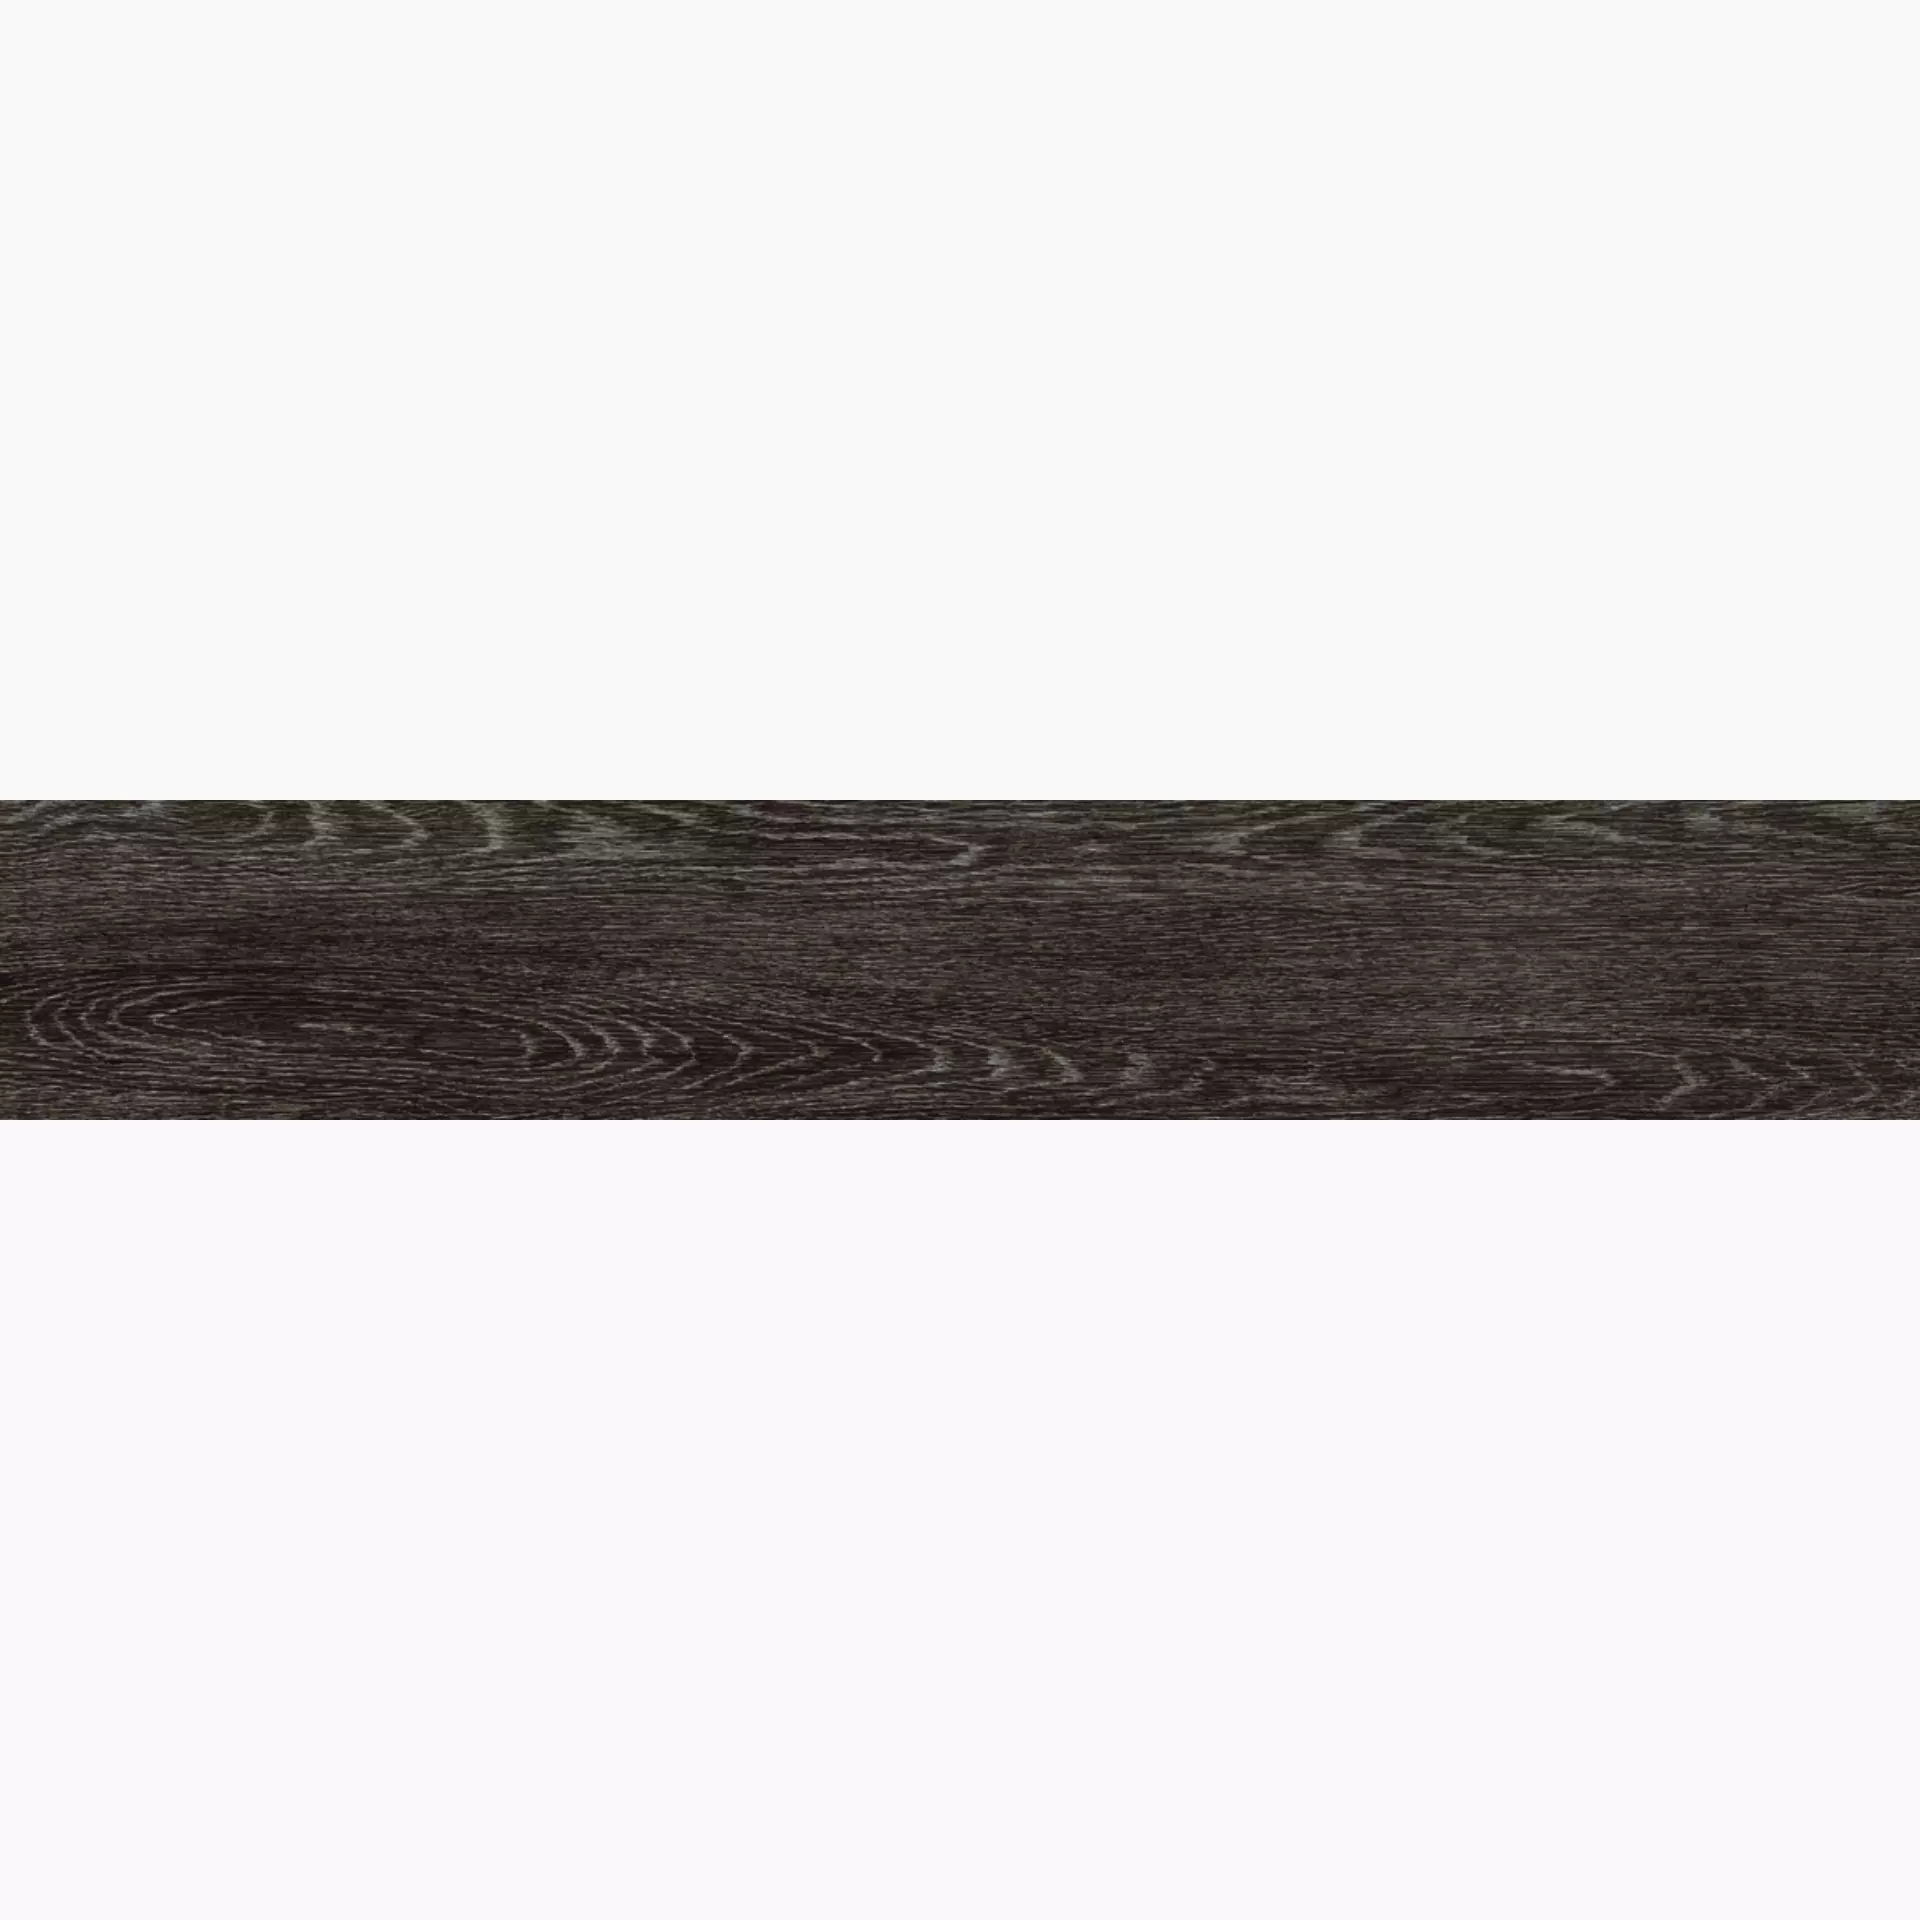 Ergon Tr3Nd Brown Naturale E418 20x120cm rectified 9,5mm